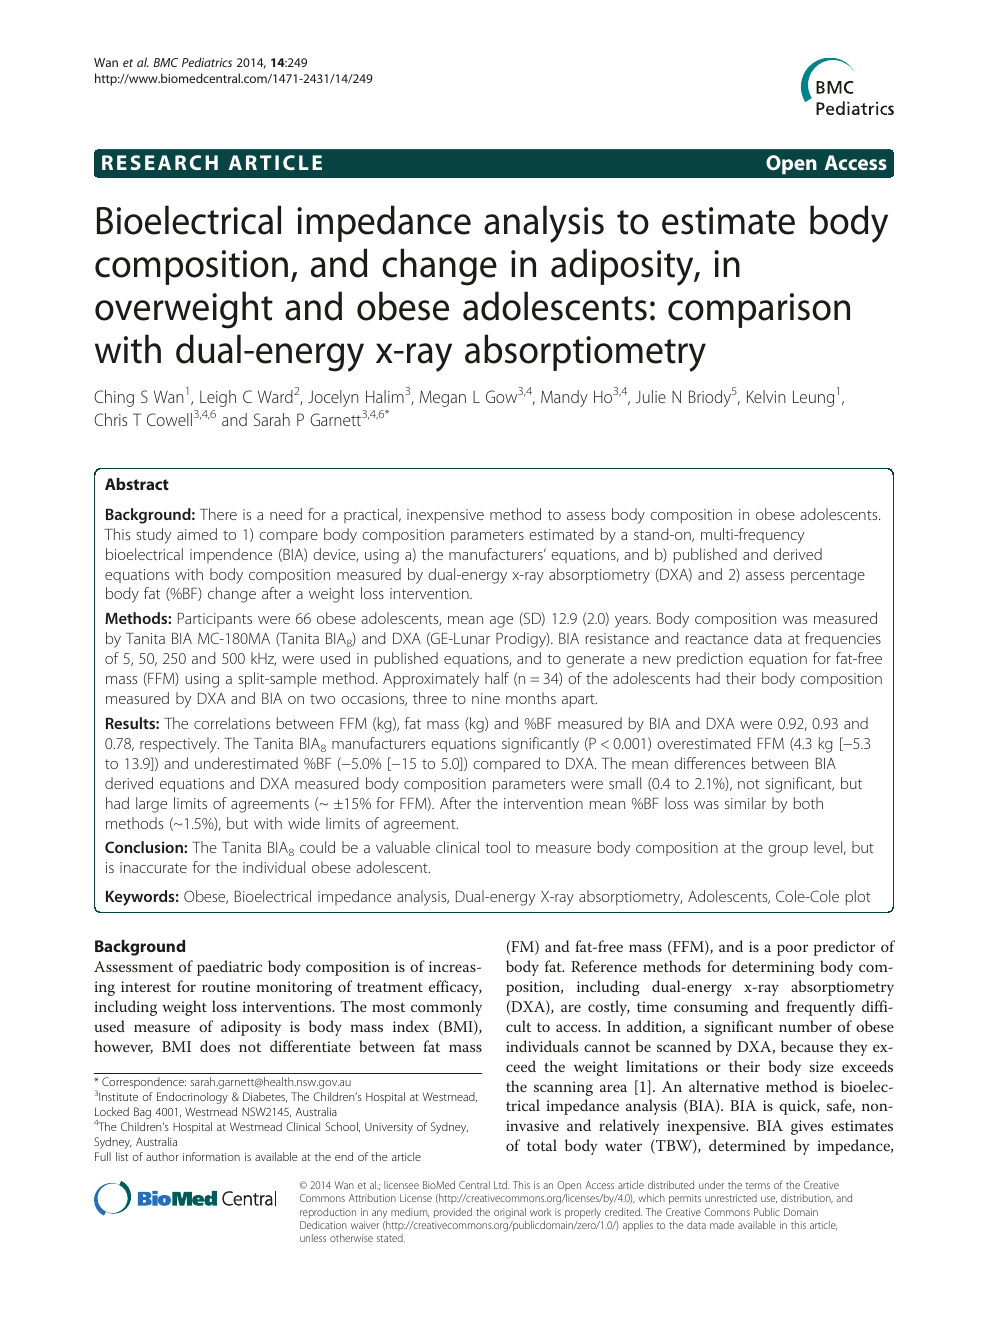 Body composition assessment using bioelectrical impedance analysis